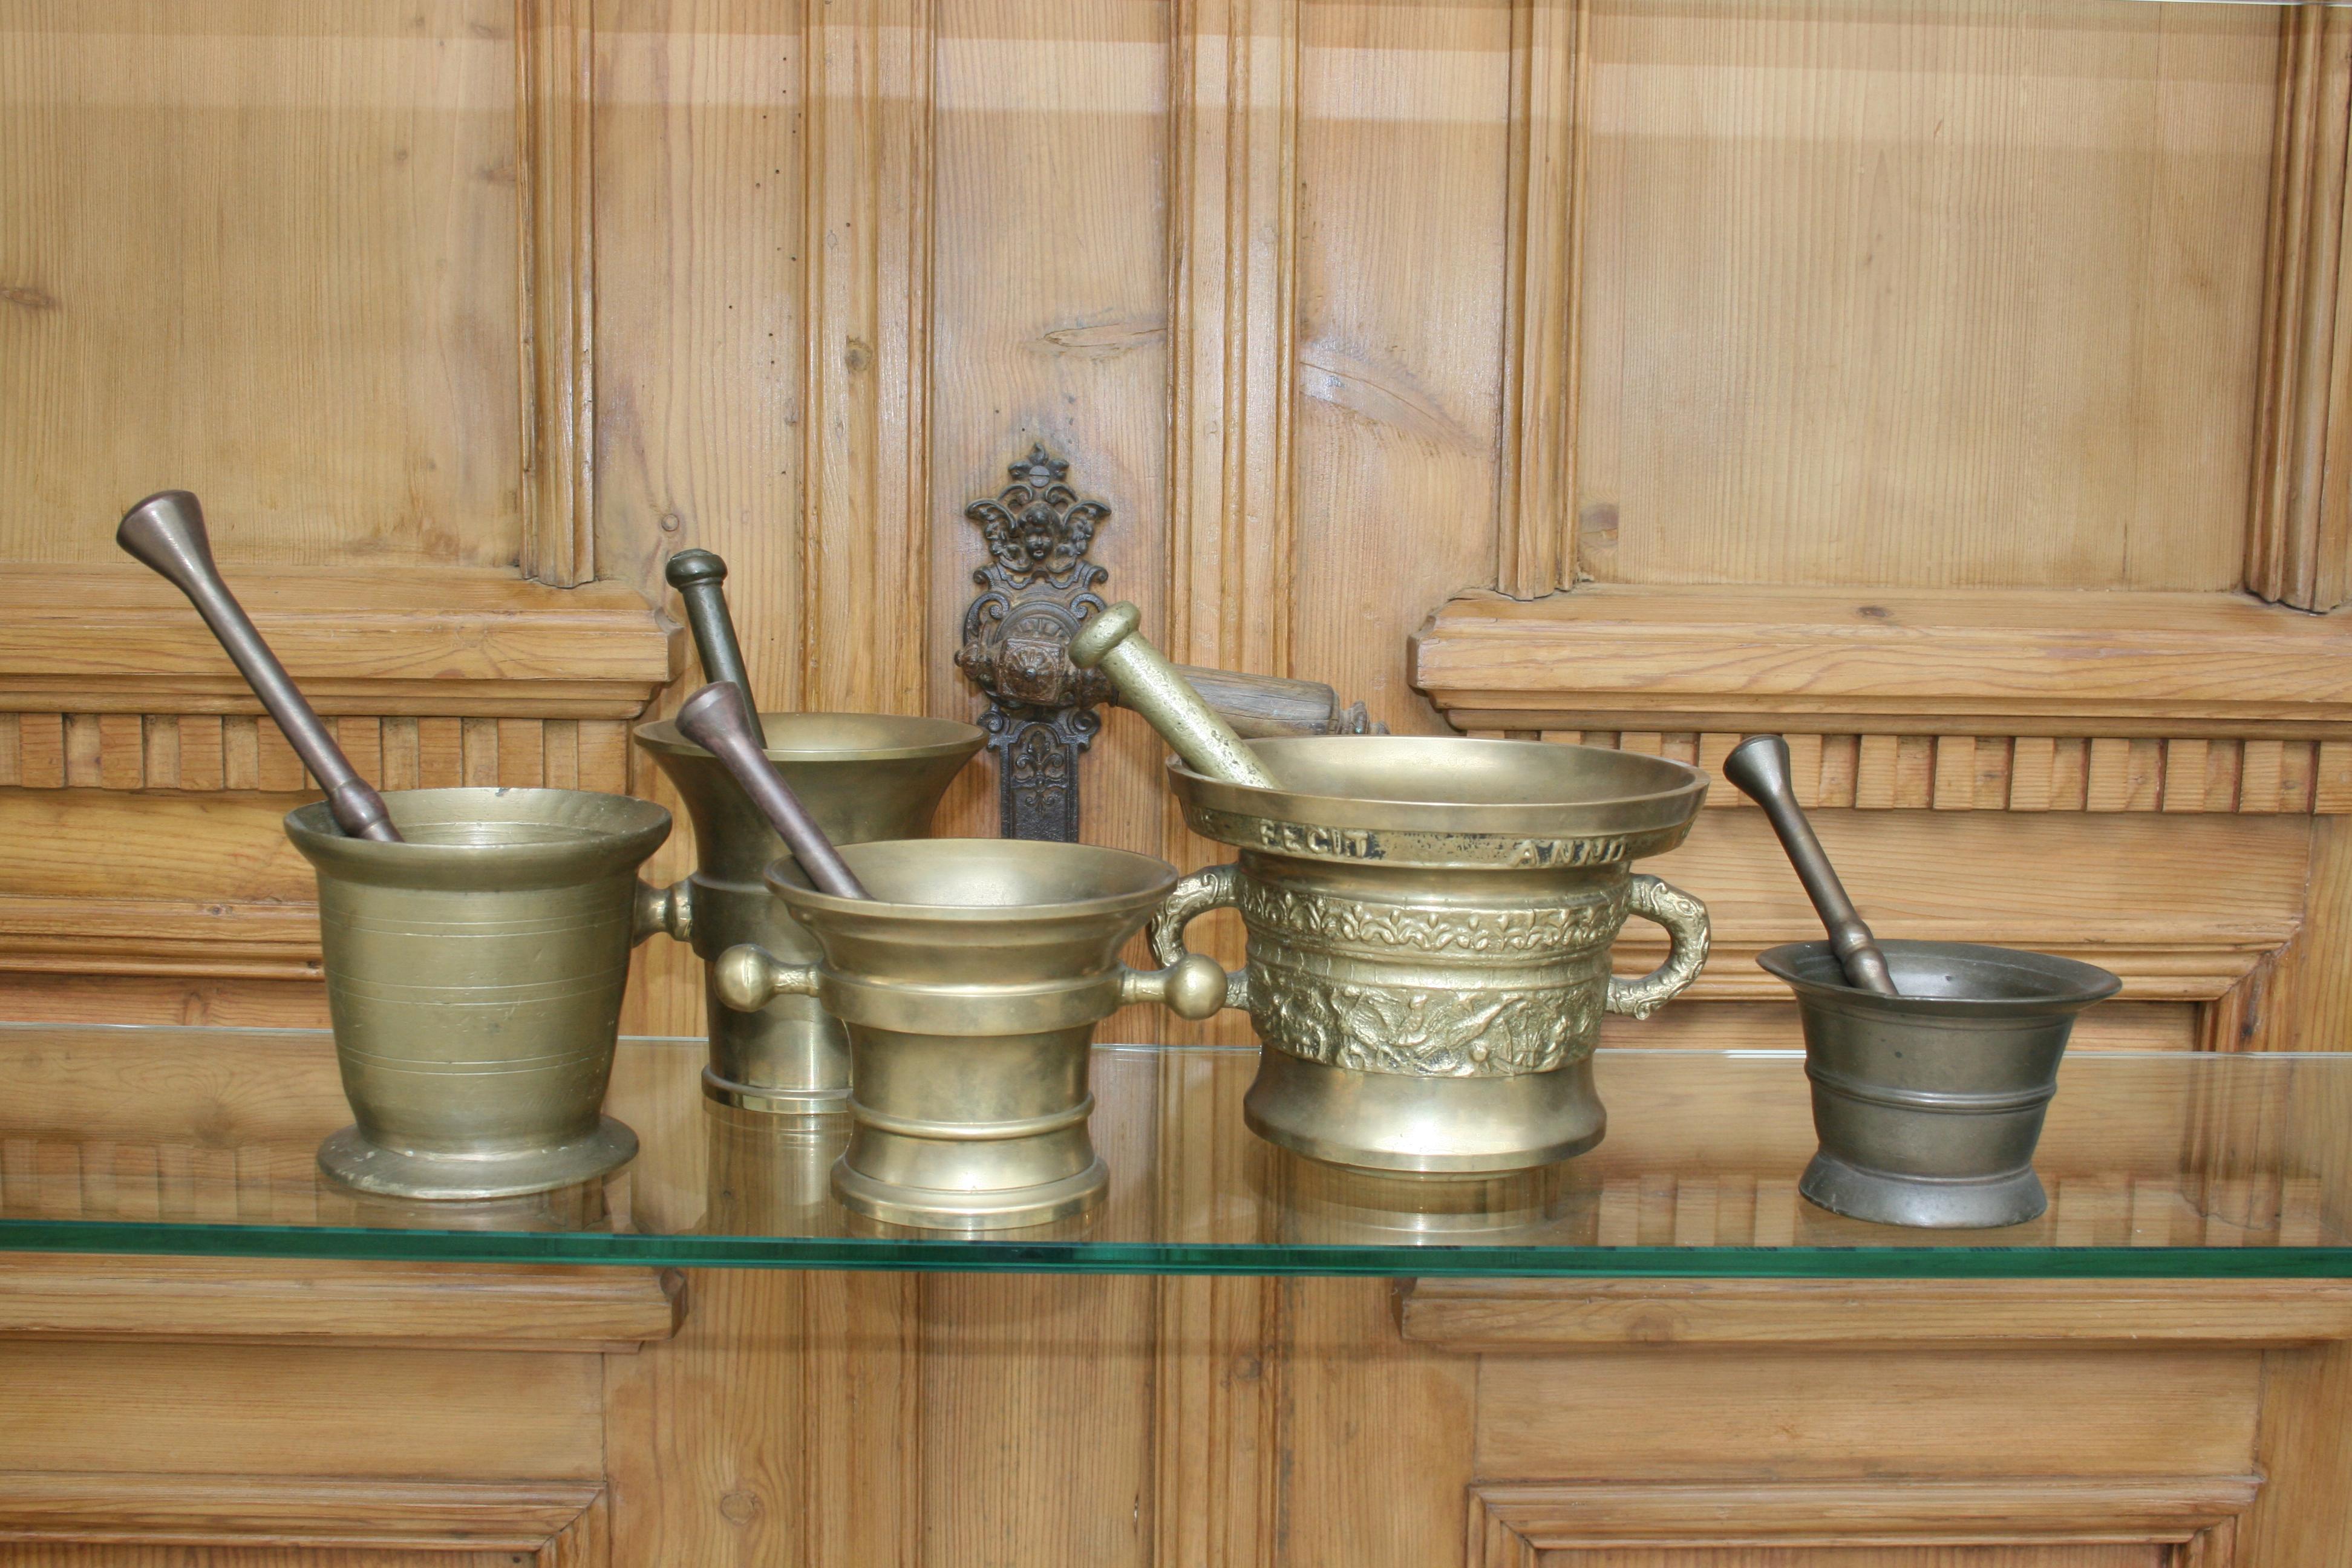 Set of 5 different German apothecary mortars with pestles.
All from the period, circa 1900.

Dimensions:
13 cm high x 18 cm diameter / 5.11 inch high x 7.08 inch diameter,
13 cm high x 12,5 cm diameter / 5.11 inch high x 4.92 inch